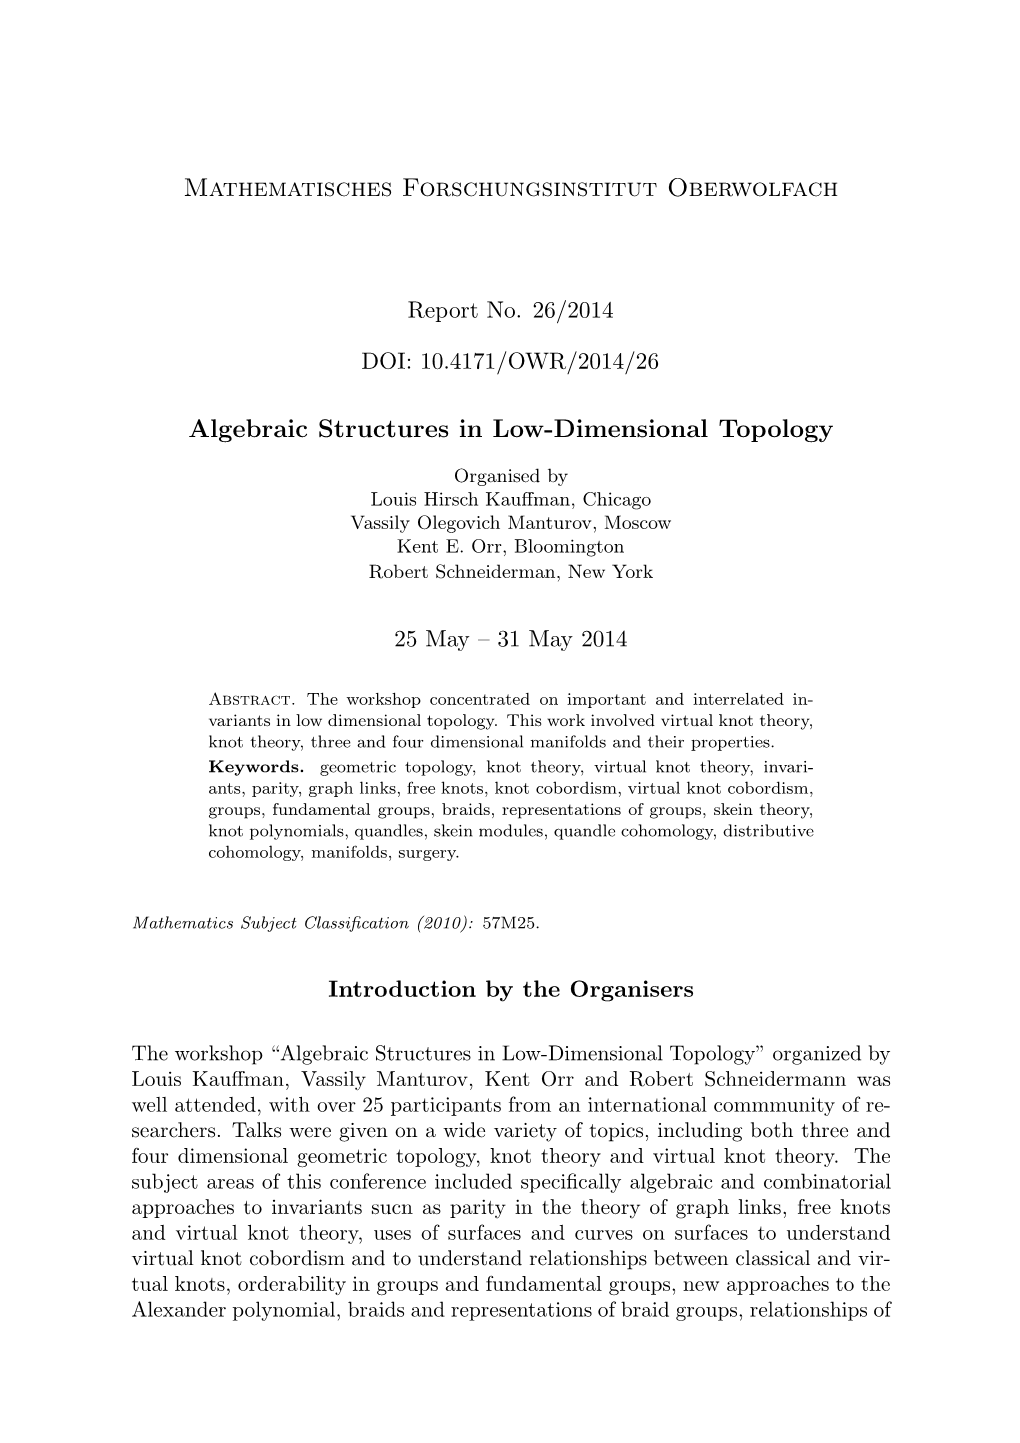 Algebraic Structures in Low-Dimensional Topology